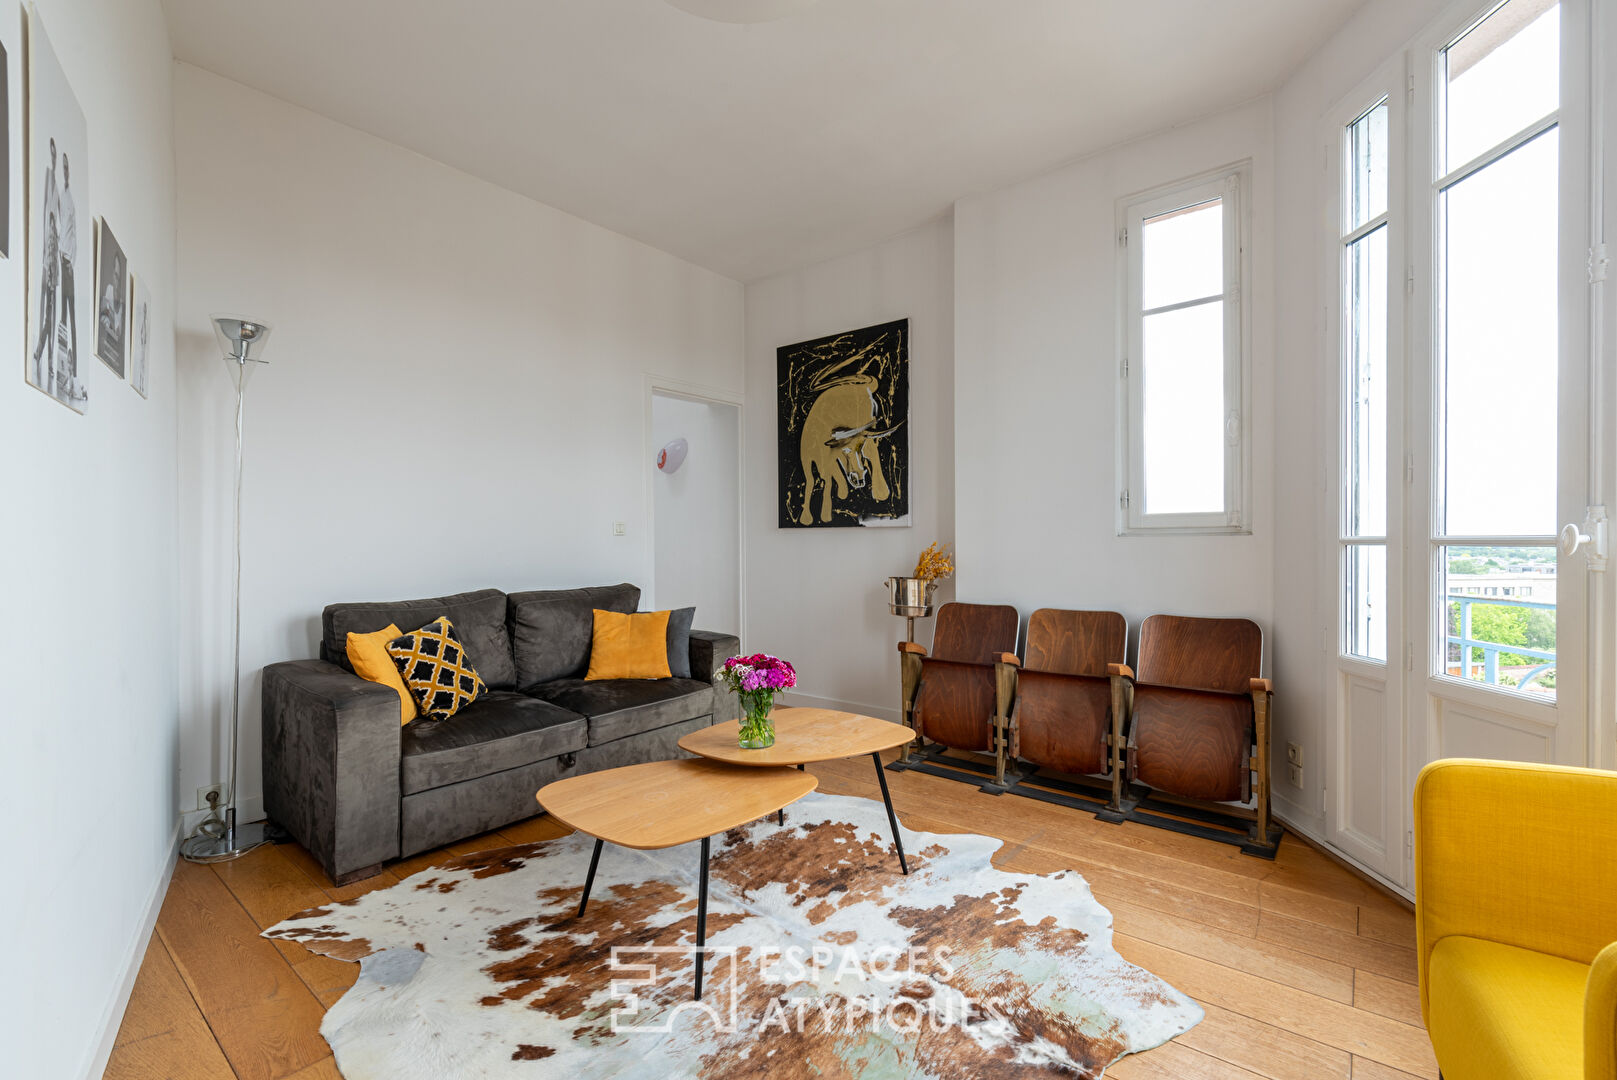 Charming duplex with view – Rennes city center